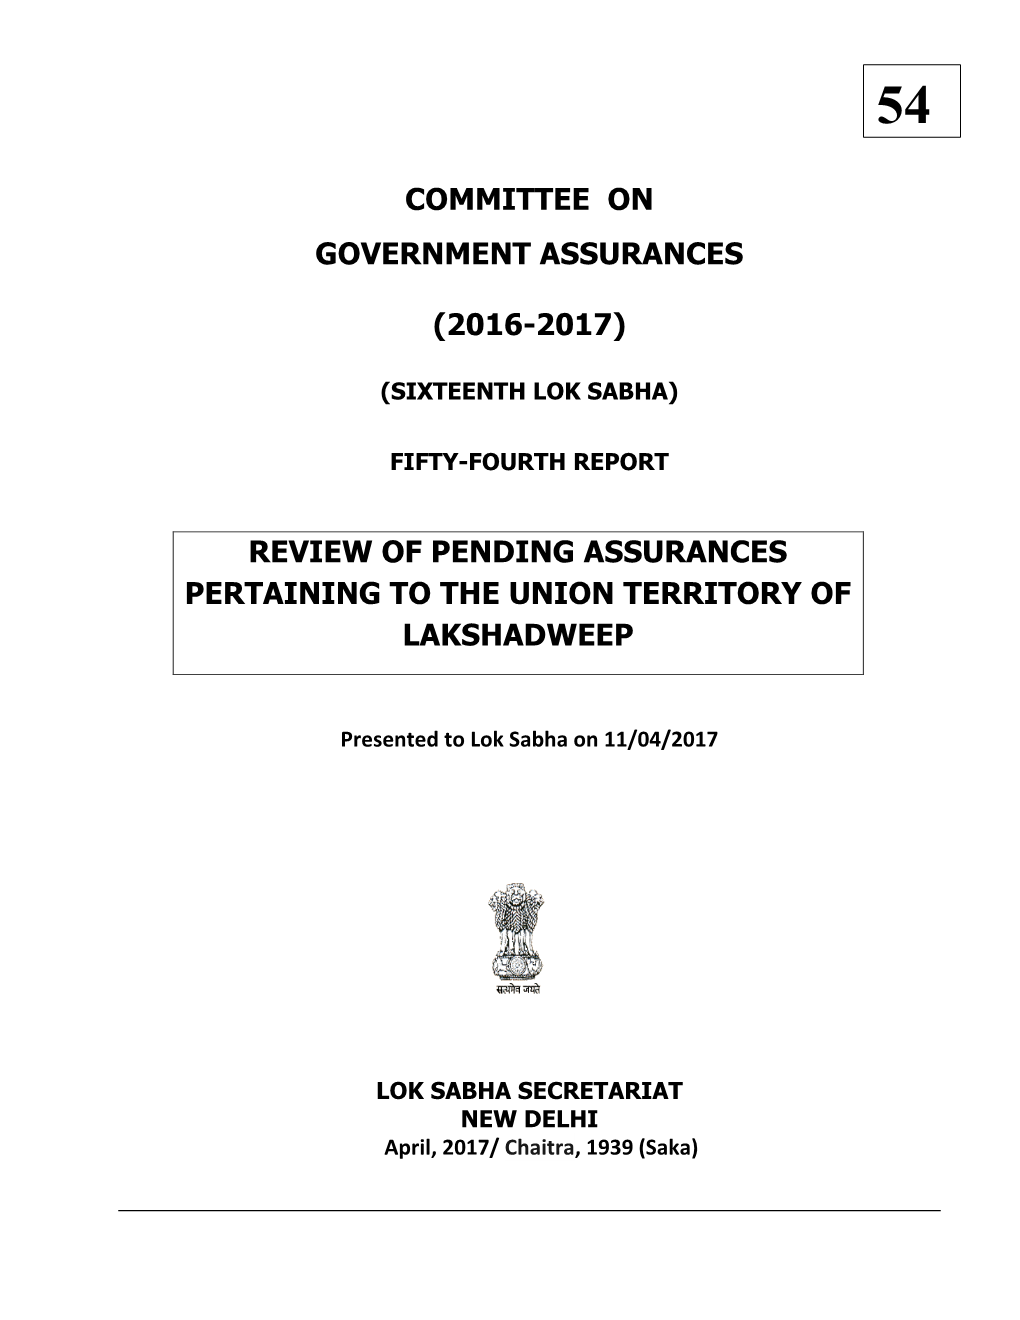 Committee on Government Assurances (2016-2017